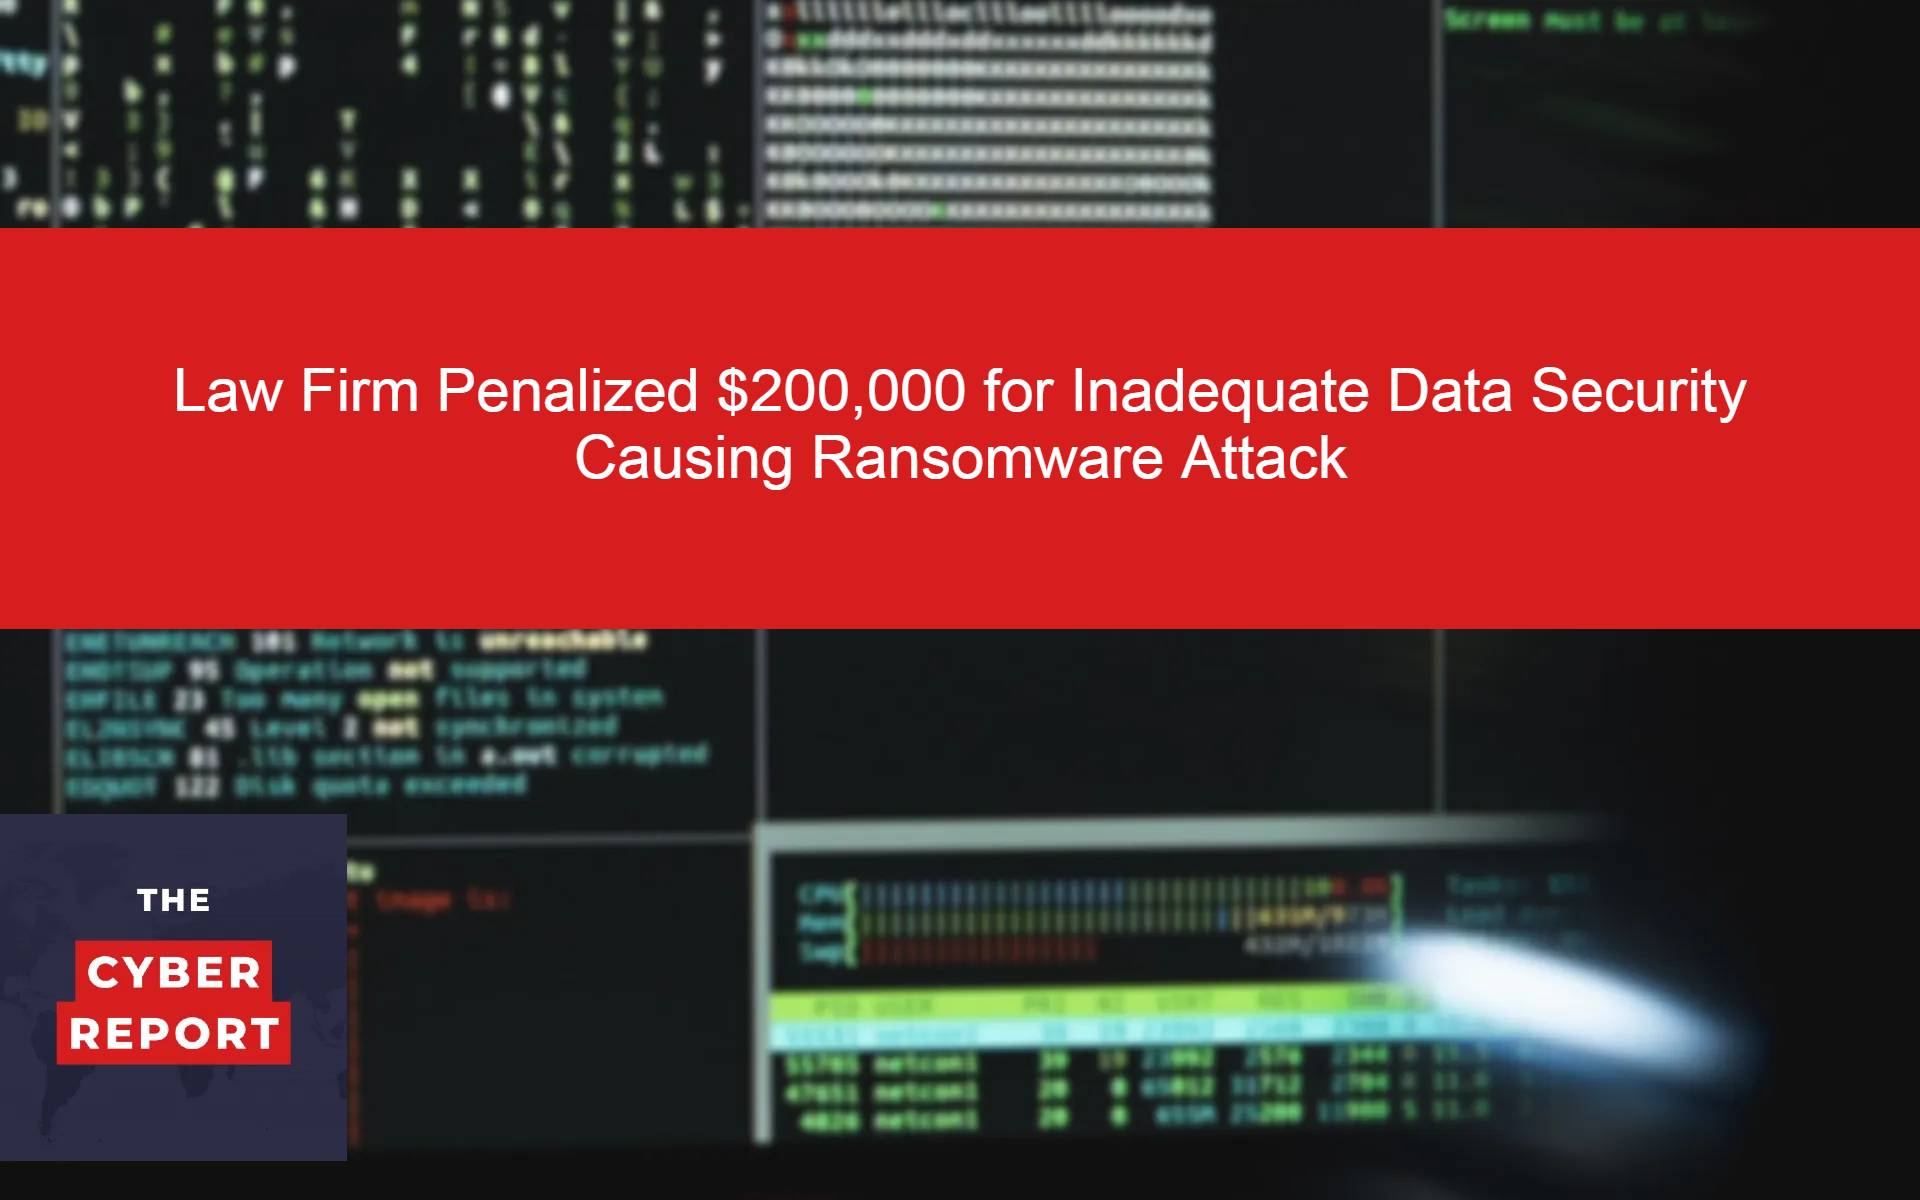 Law Firm Penalized $200,000 for Inadequate Data Security Causing Ransomware Attack